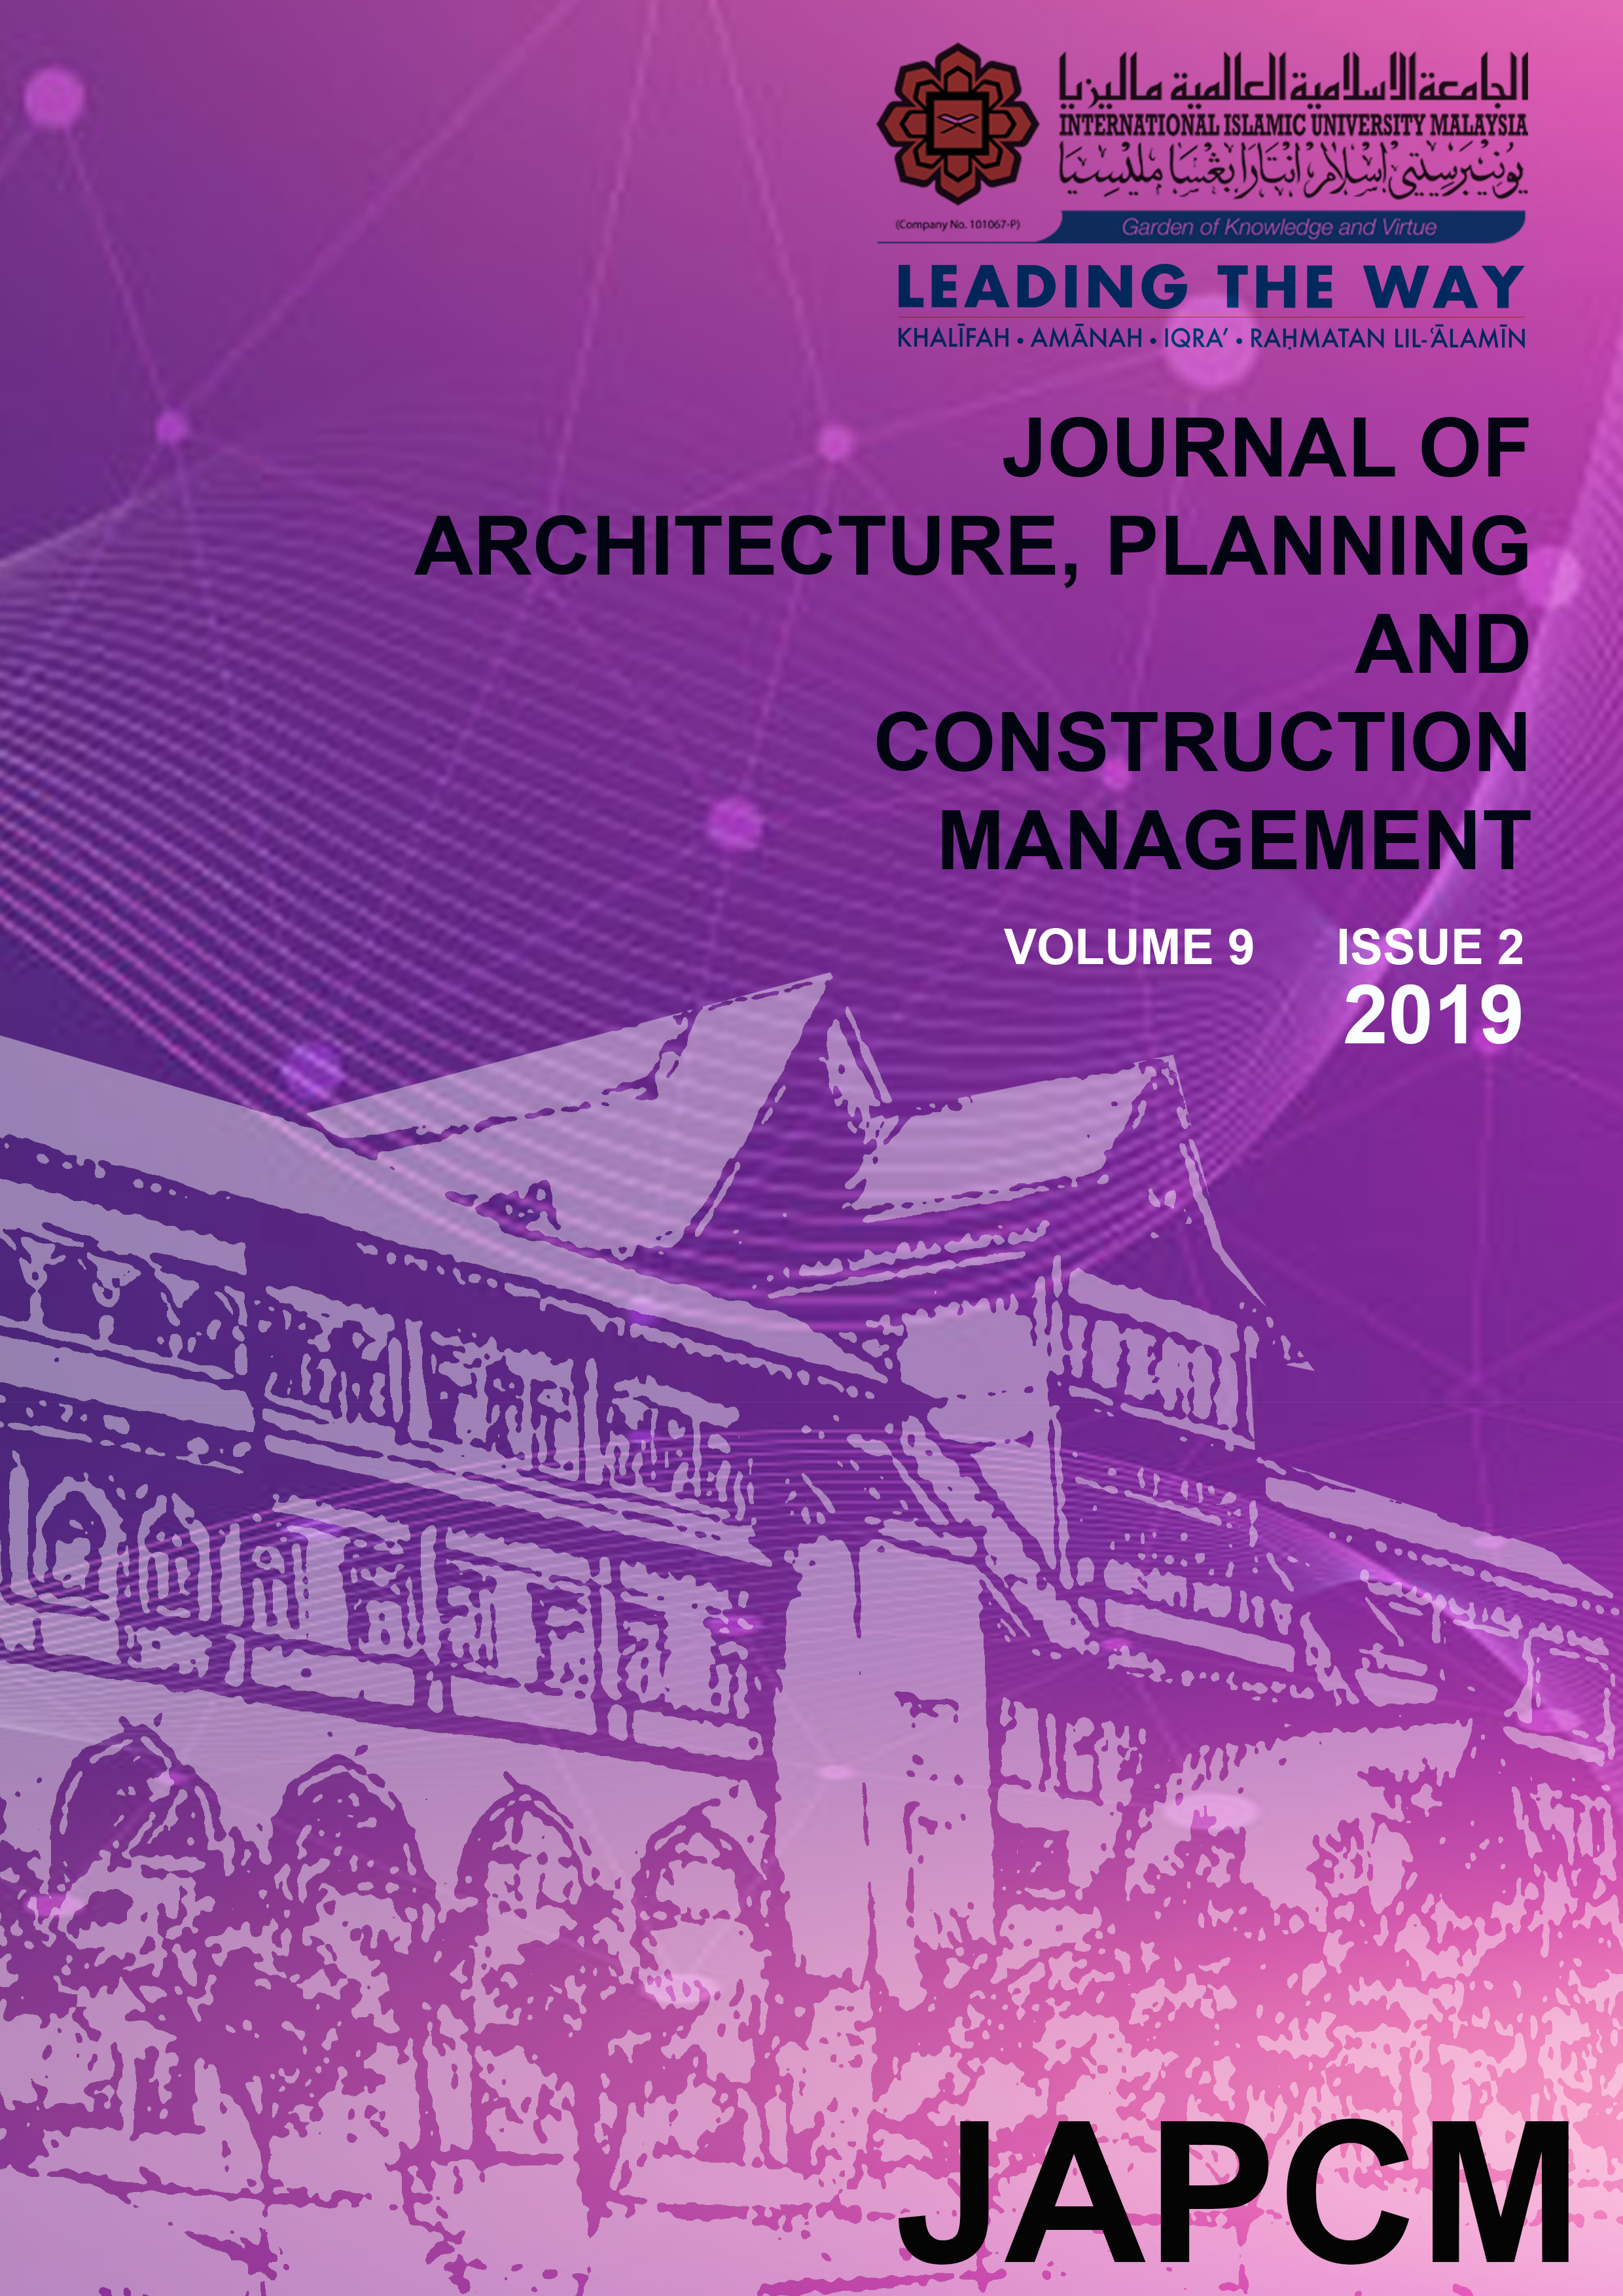 					View Vol. 9 No. 2 (2019): Journal of Architecture, Planning and Construction Management (JAPCM) 
				